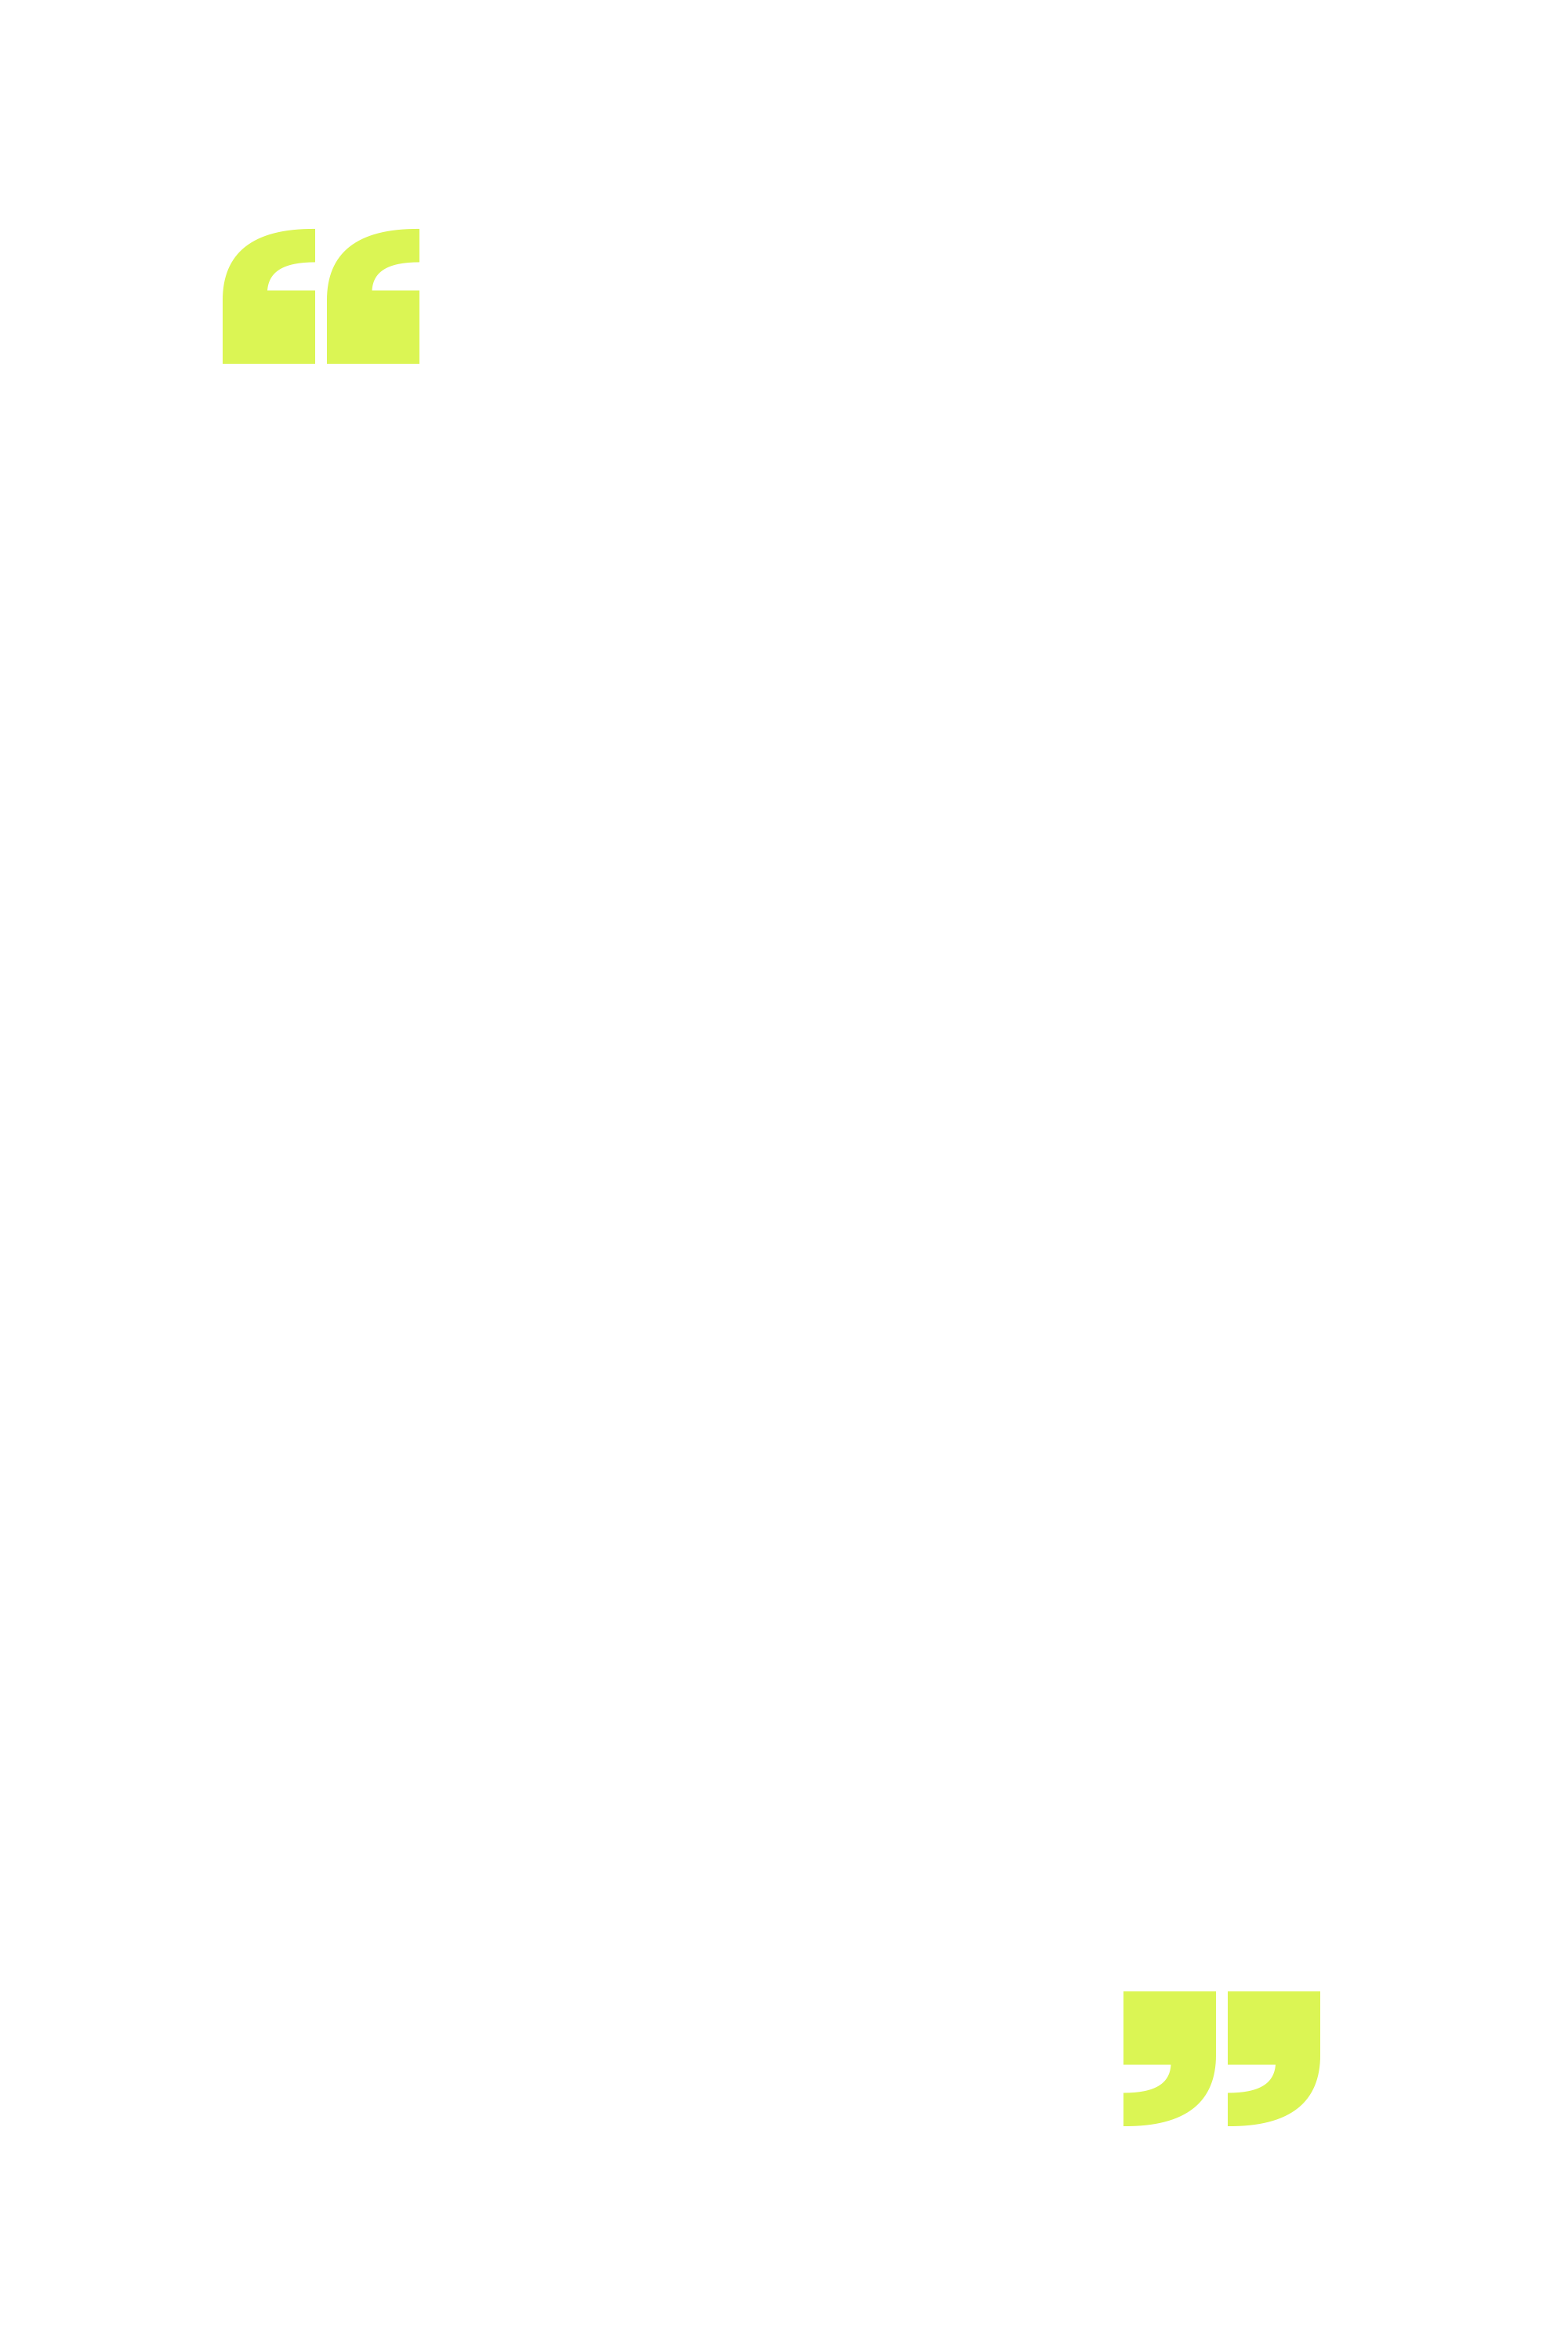 You just have to really love what you do.  Love has to be bigger than all problems.